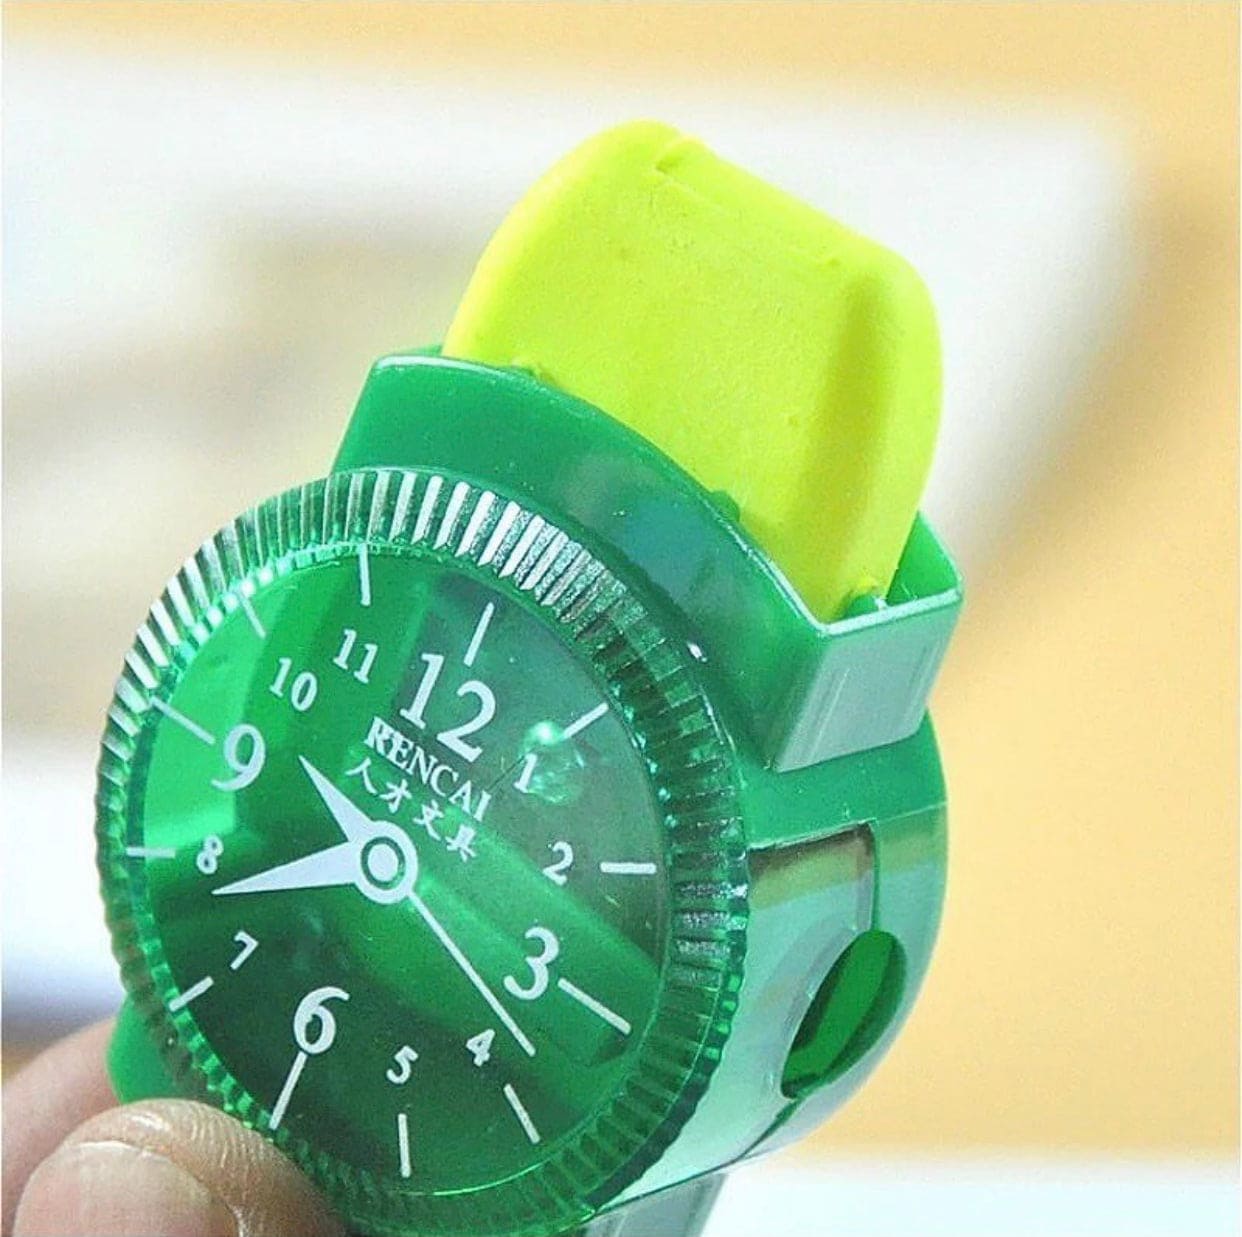 Creative 3 in 1 Pencil Sharpener, Creative Wristwatch Modelling Pencil Sharpener With Eraser And Brush